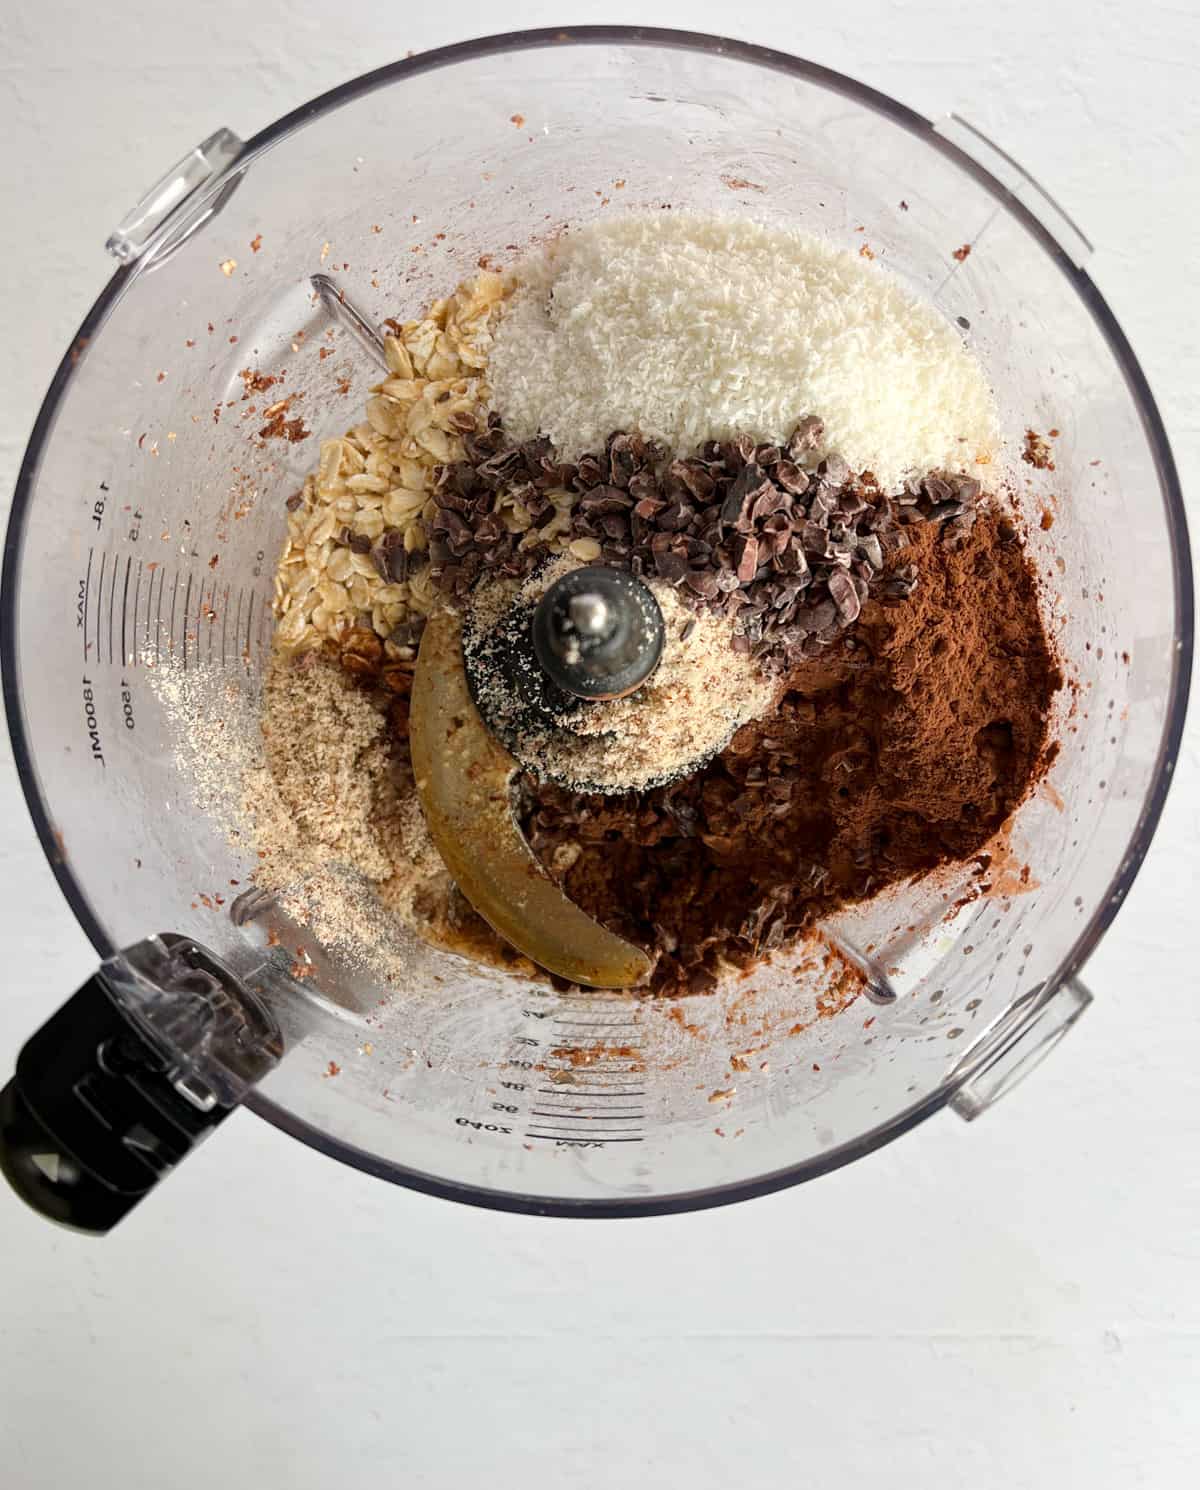 bliss ball ingredients in a food processor bowl before processing